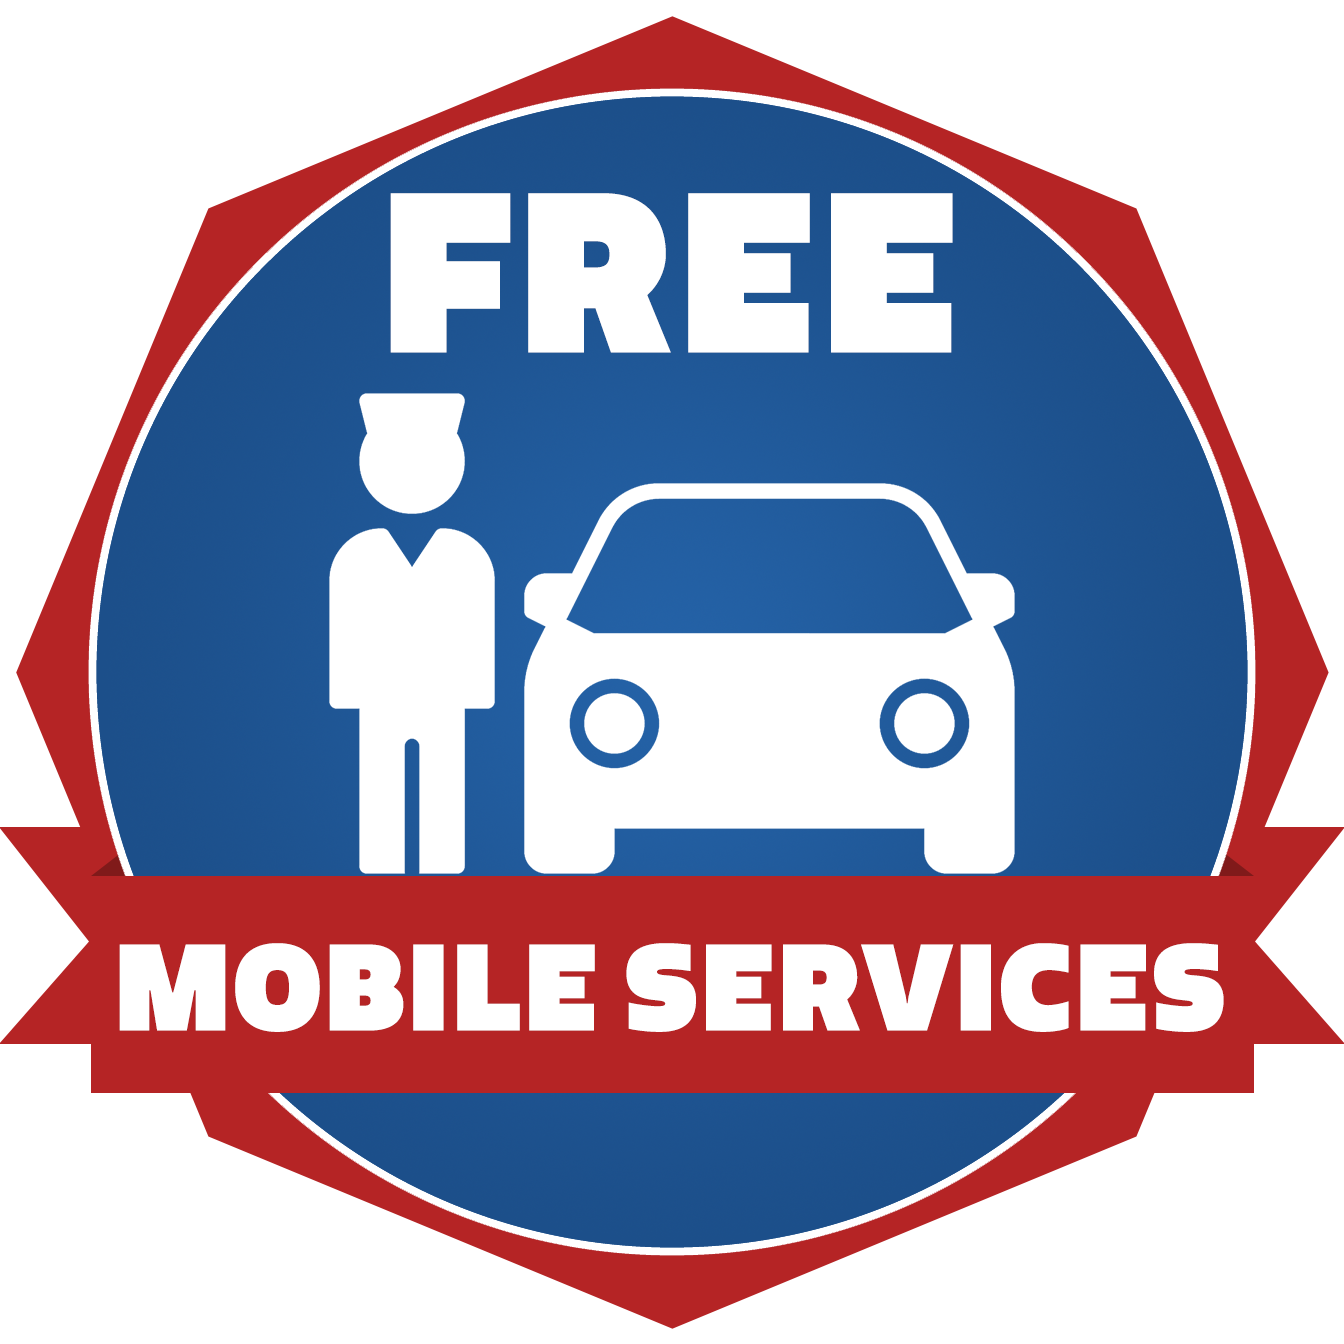 Free mobile services badge